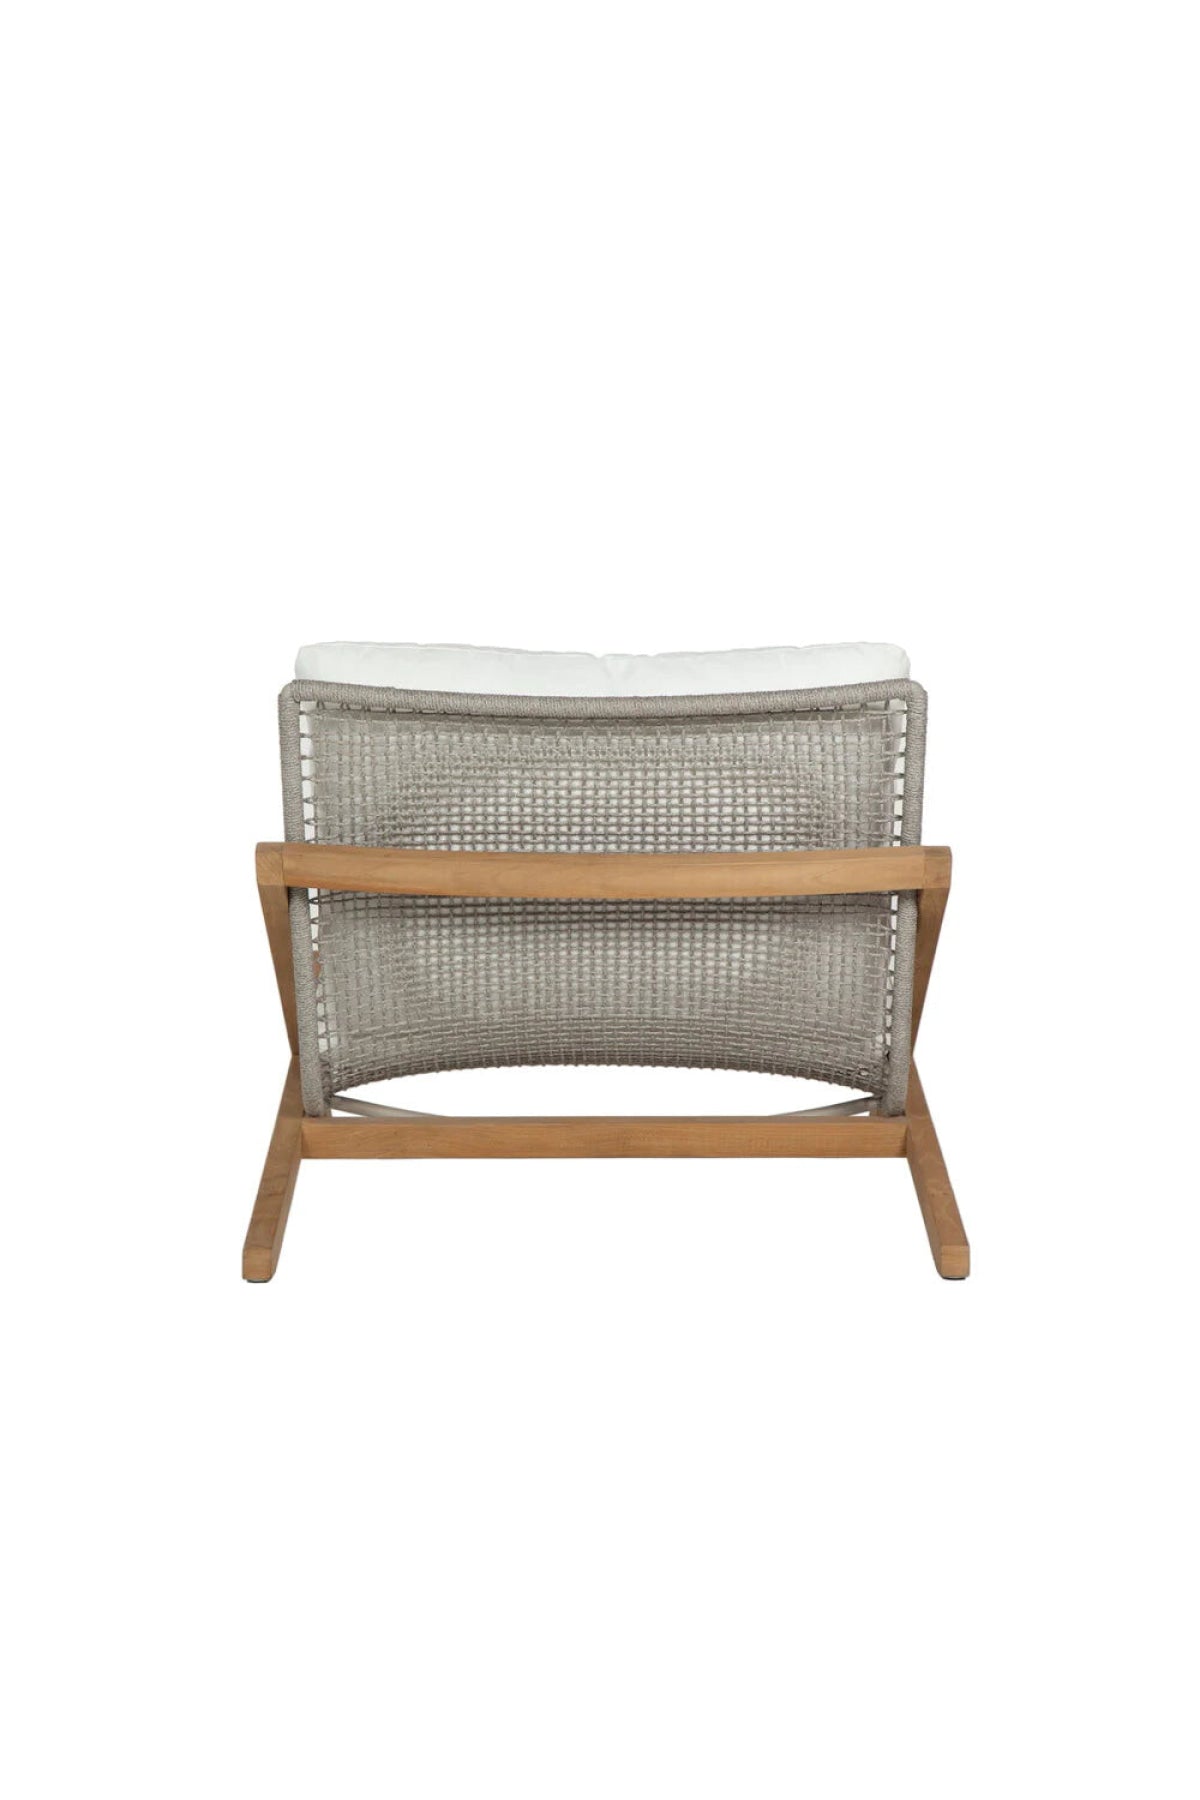 Venice Outdoor Lounge Chair - Natural